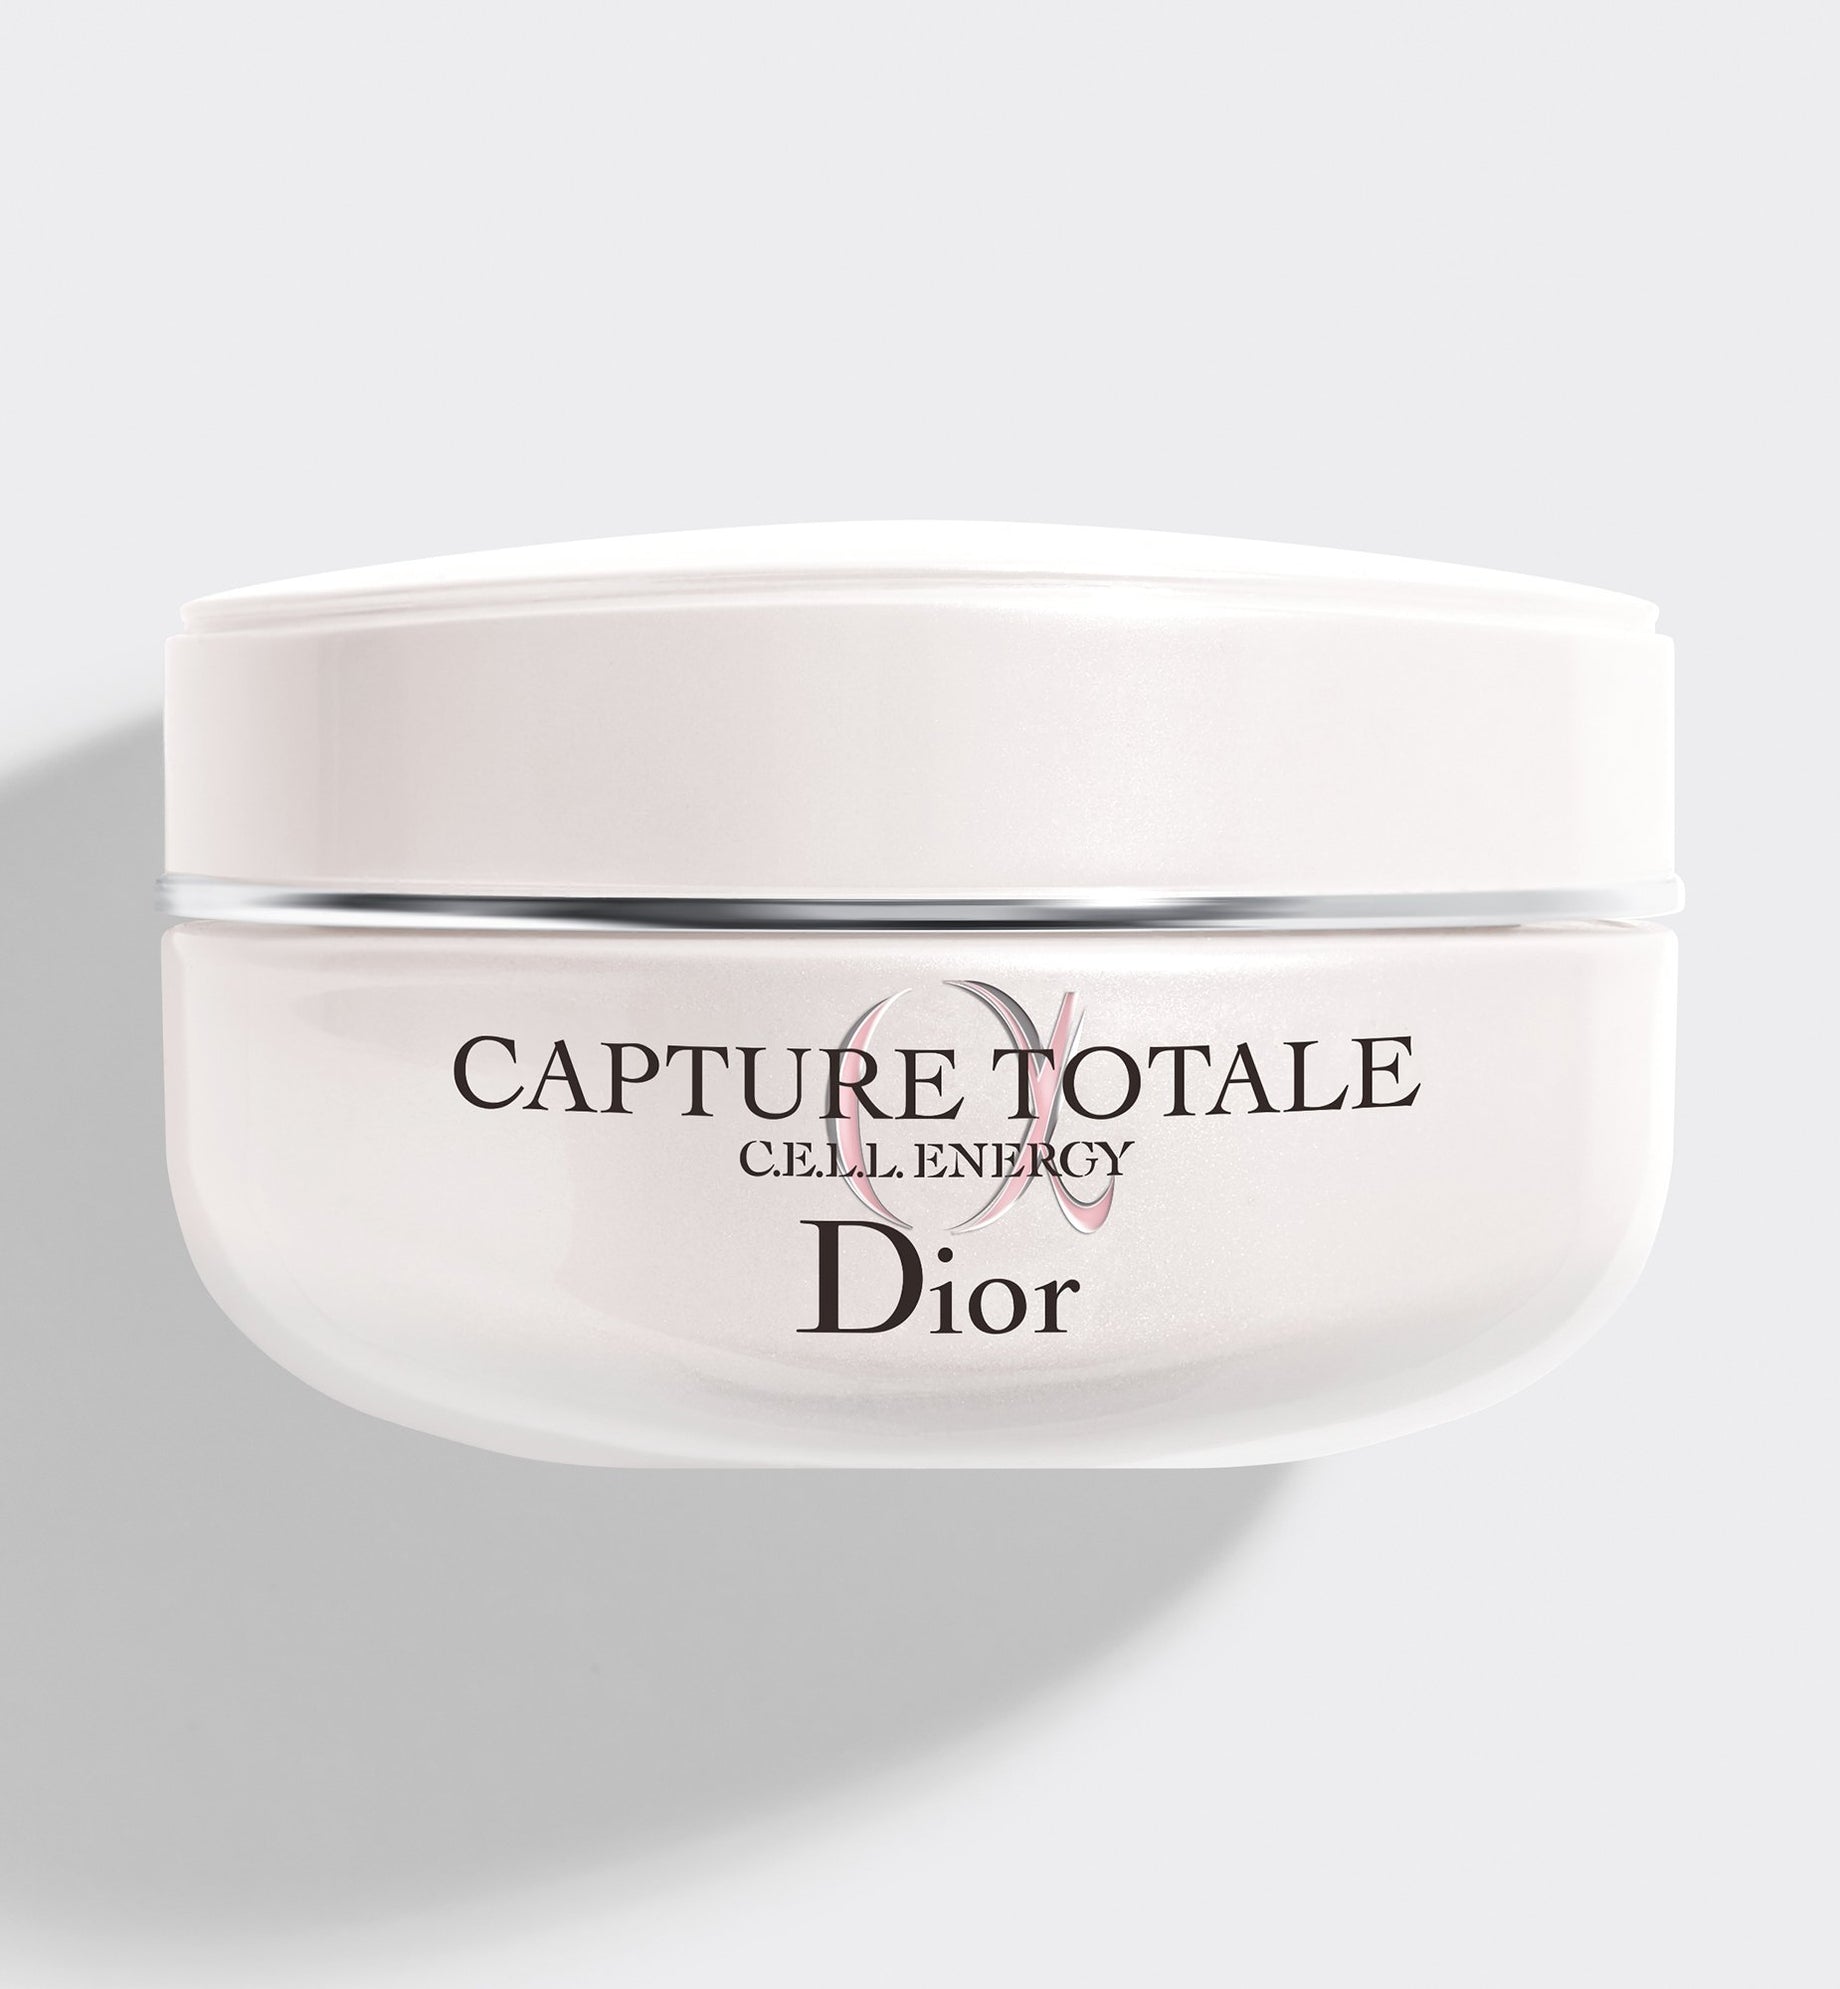 CAPTURE TOTALE C.E.L.L ENERGY* FIRMING & WRINKLE CORRECTING CREME